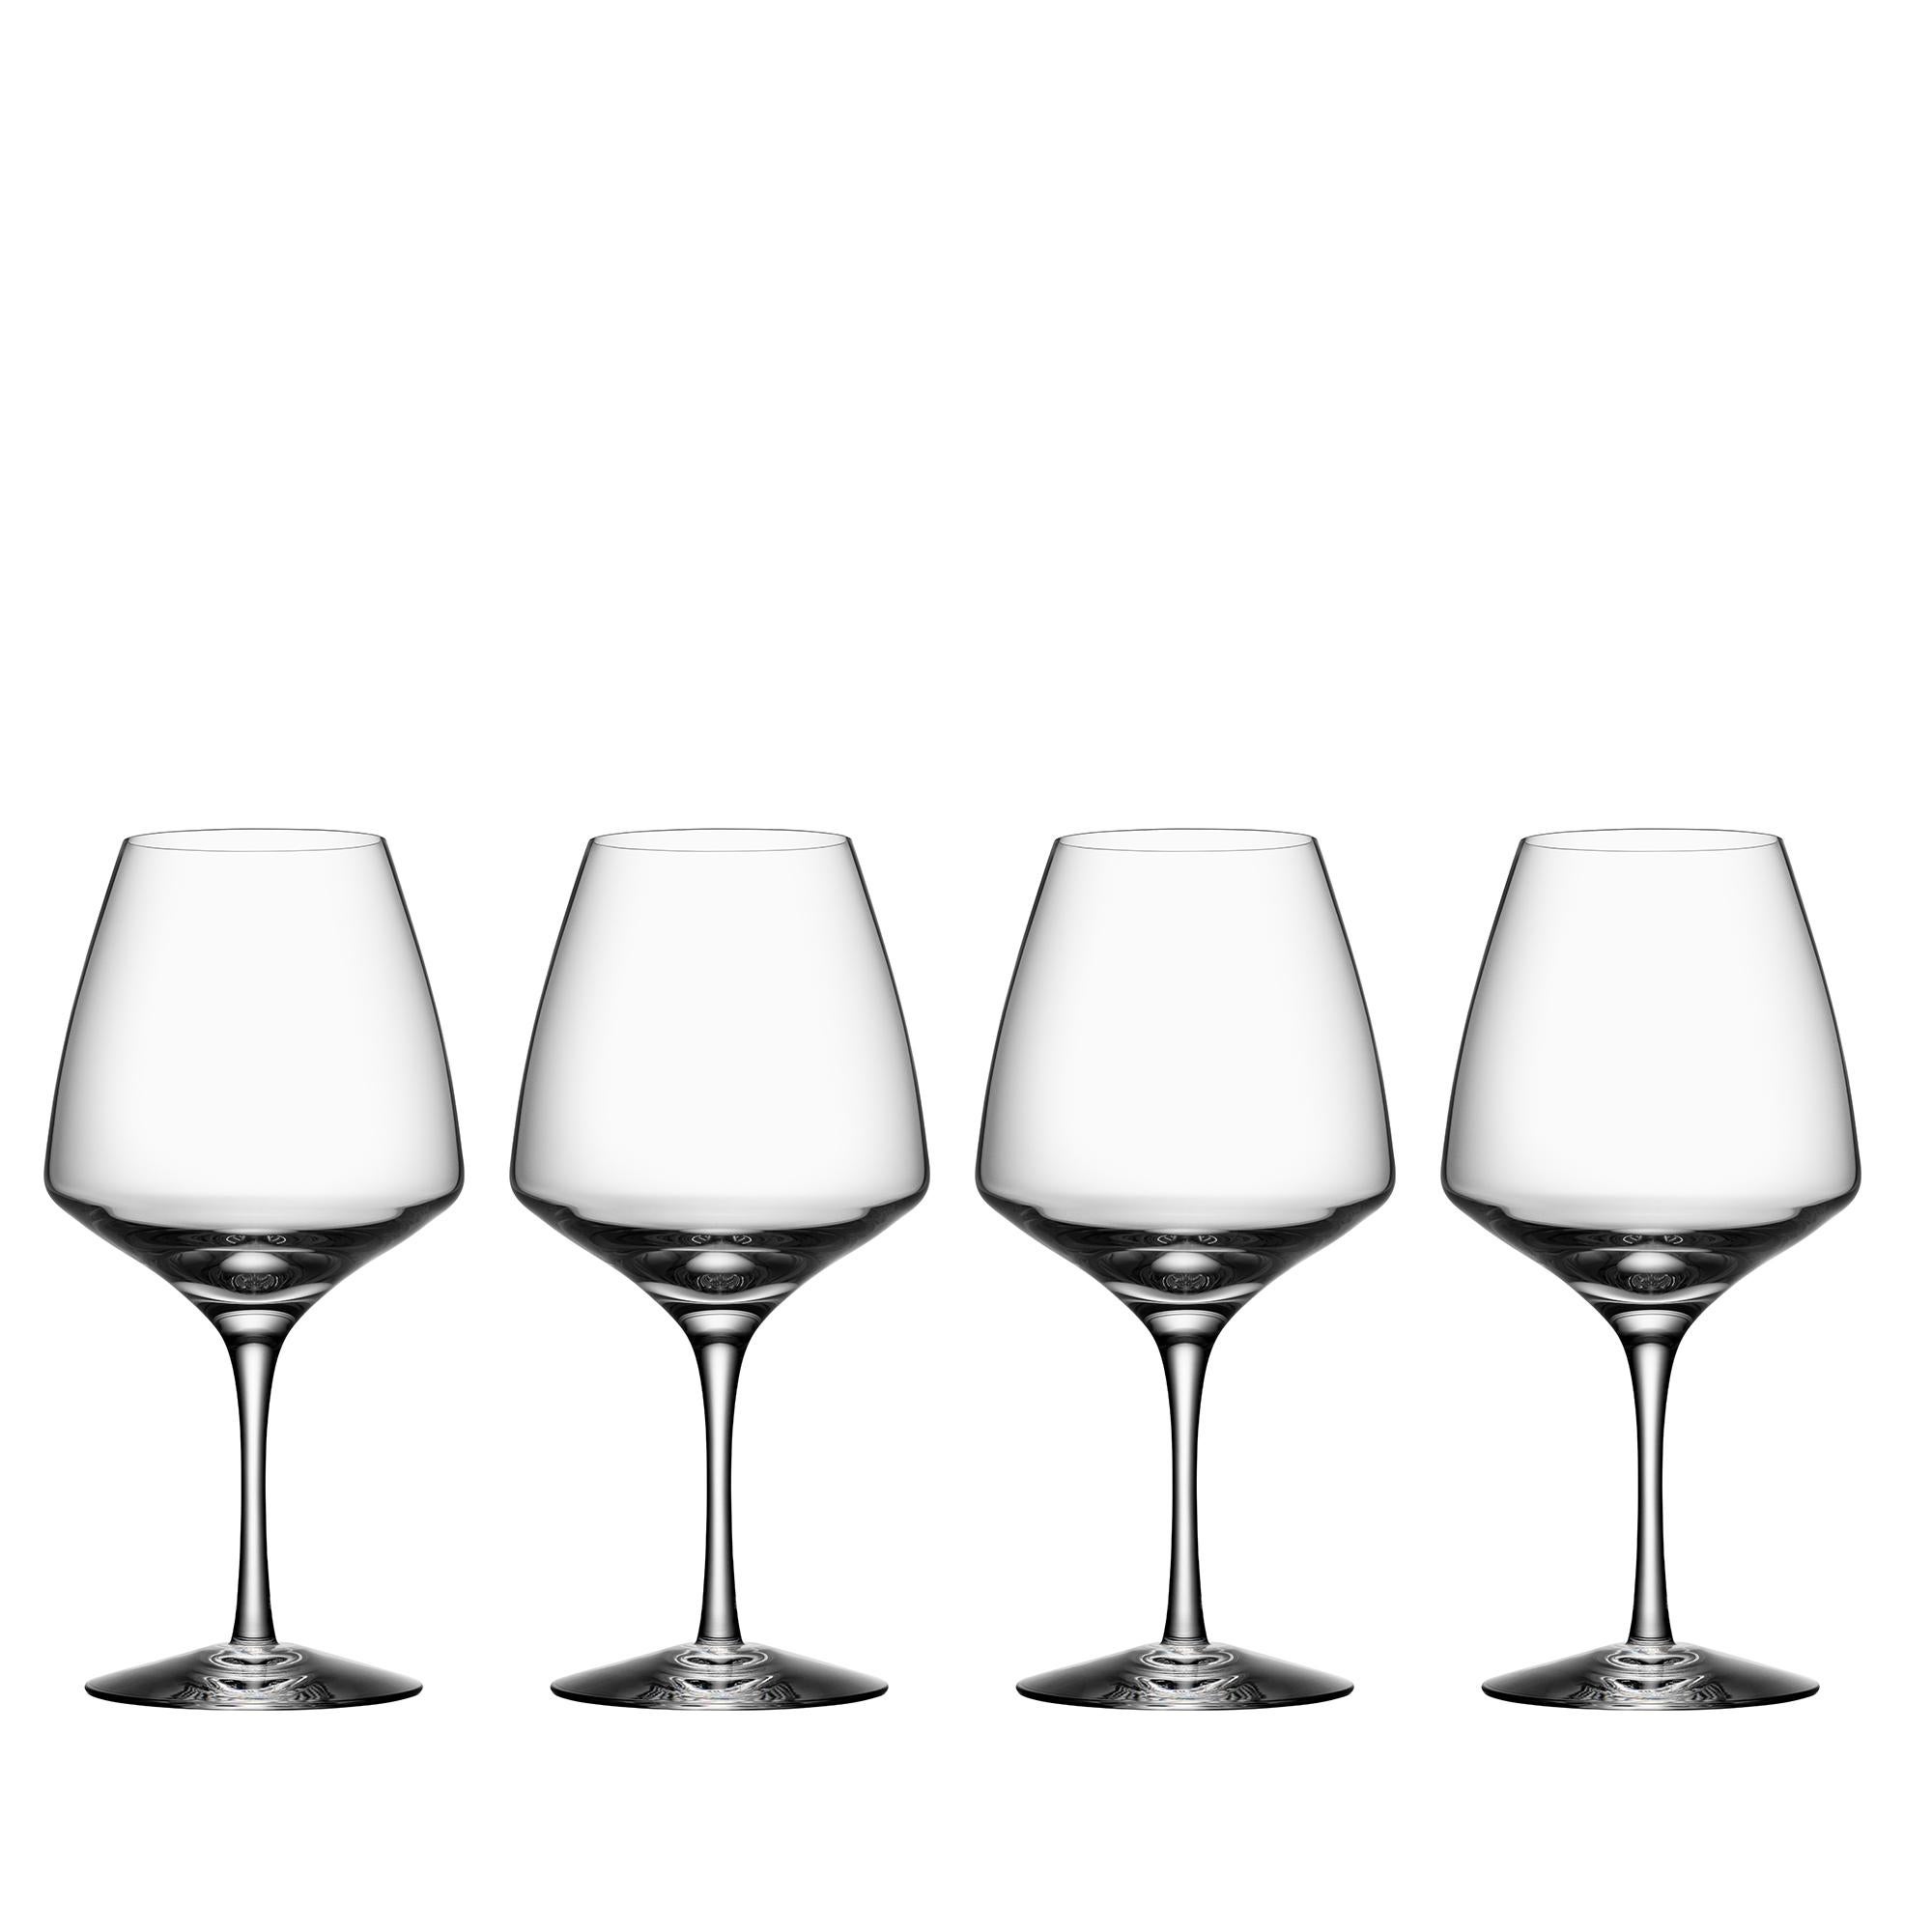 Pulse Wine from Orrefors, which holds 12 oz, is outstanding for any kind of wine, but especially red wines. The wide bowl allows mature wine to breathe bringing out rich aromas and a more developed flavor. The design is influenced by Scandinavian